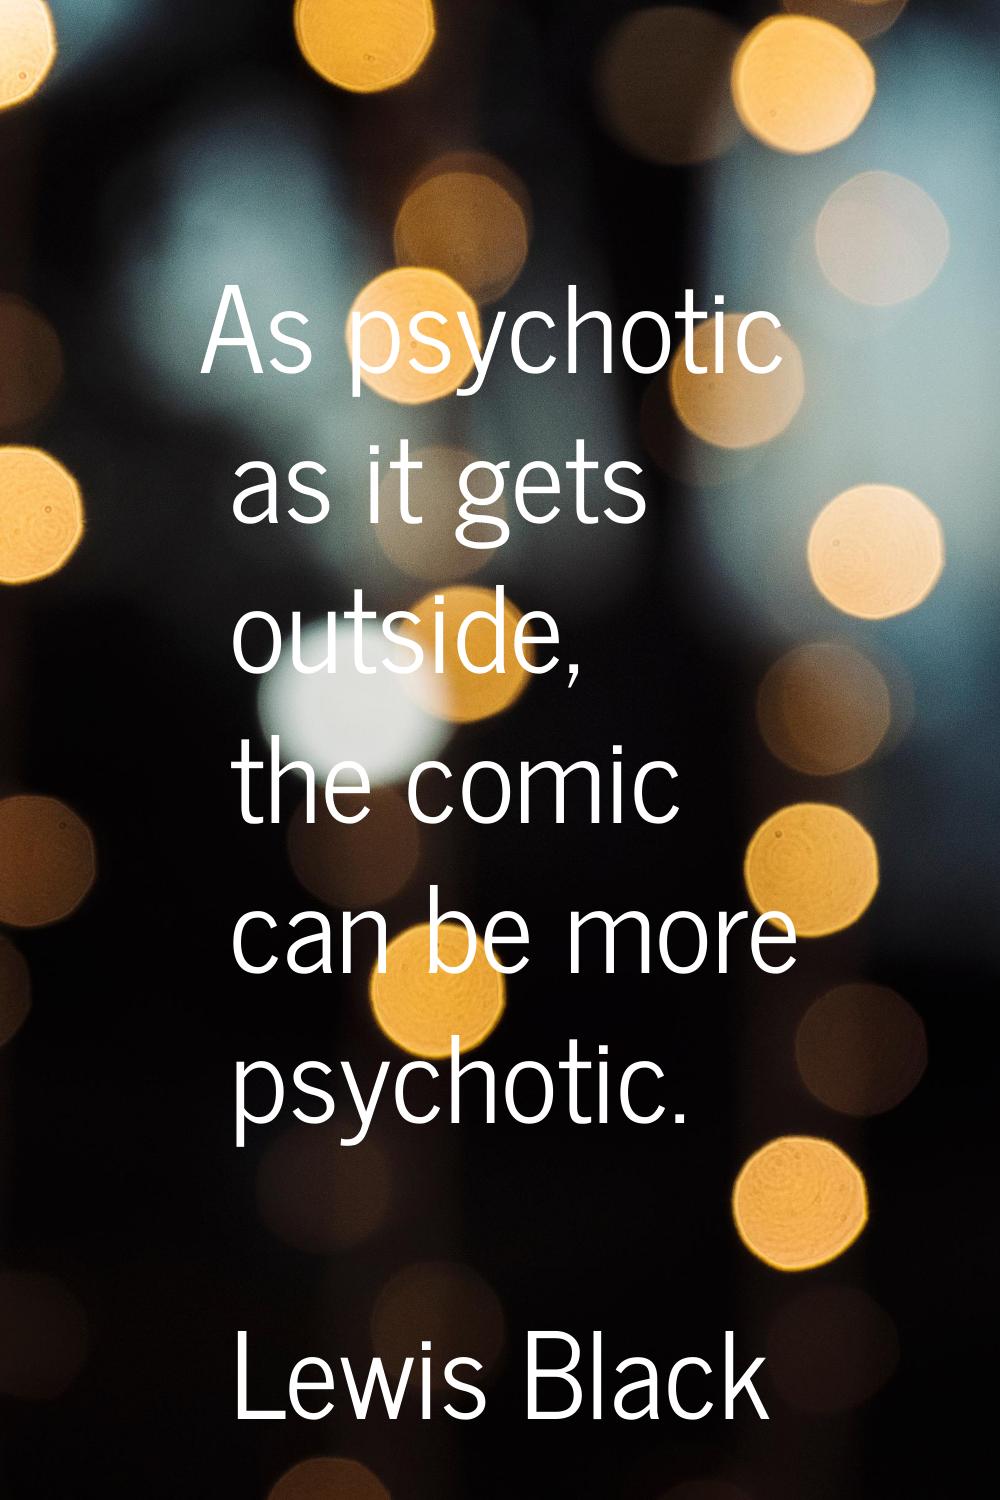 As psychotic as it gets outside, the comic can be more psychotic.